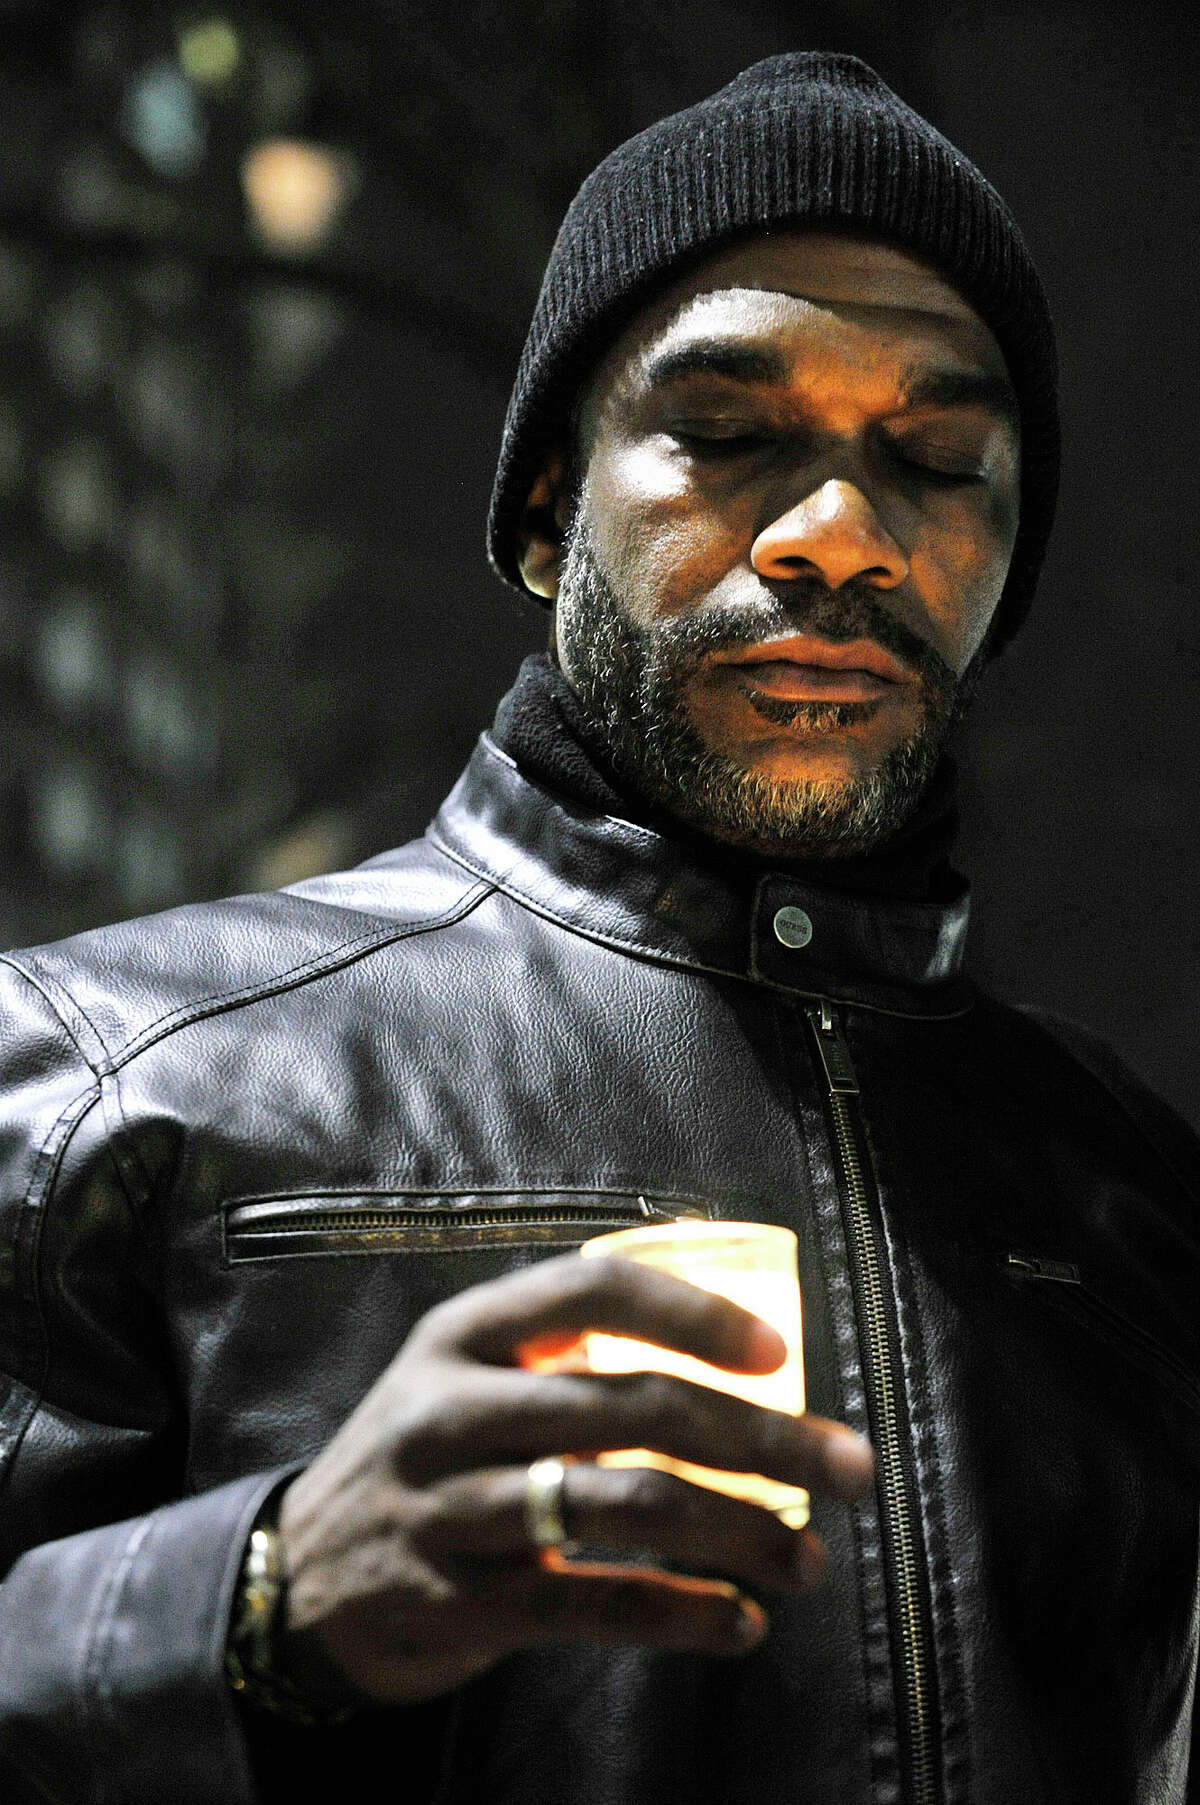 Scotty Schmidt holds a candle as a prayer is offered during the NAACP rally at the Stamford Government Center in Stamford, Conn., on Sunday, Nov. 30, 2014. The rally was in response to the St. Louis grand jury failing to indict Ferguson Police Officer Darren Wilson in the shooting death of Michael Brown Jr.